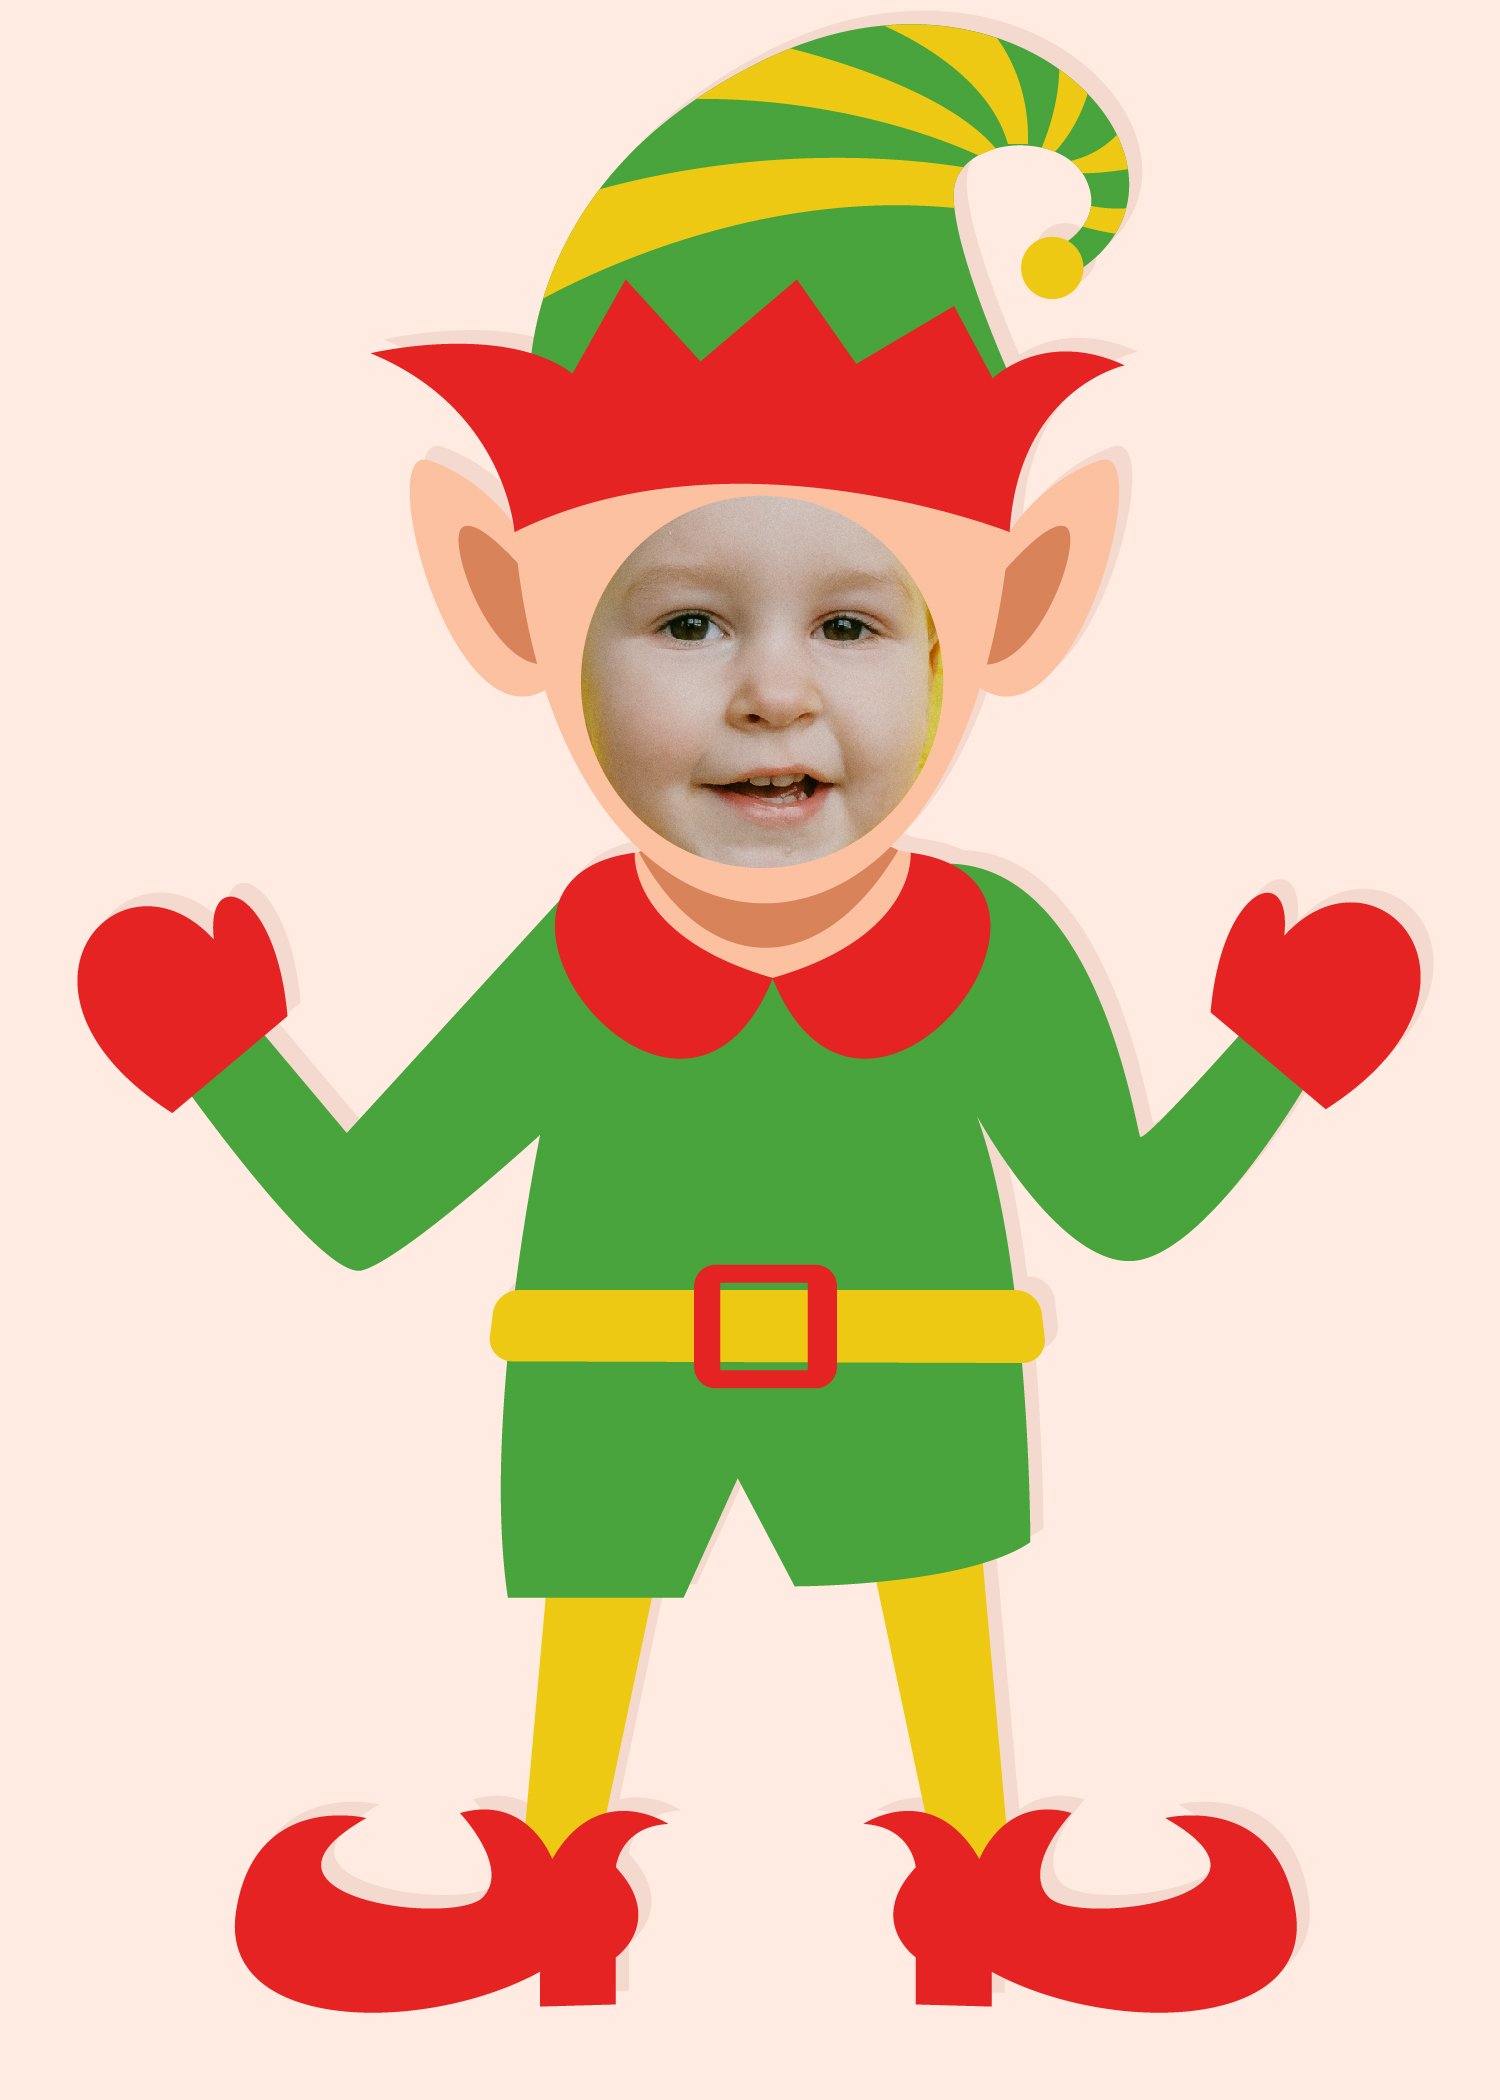 Christmas Elf Template For Photo in PSD, SVG, JPG, PNG